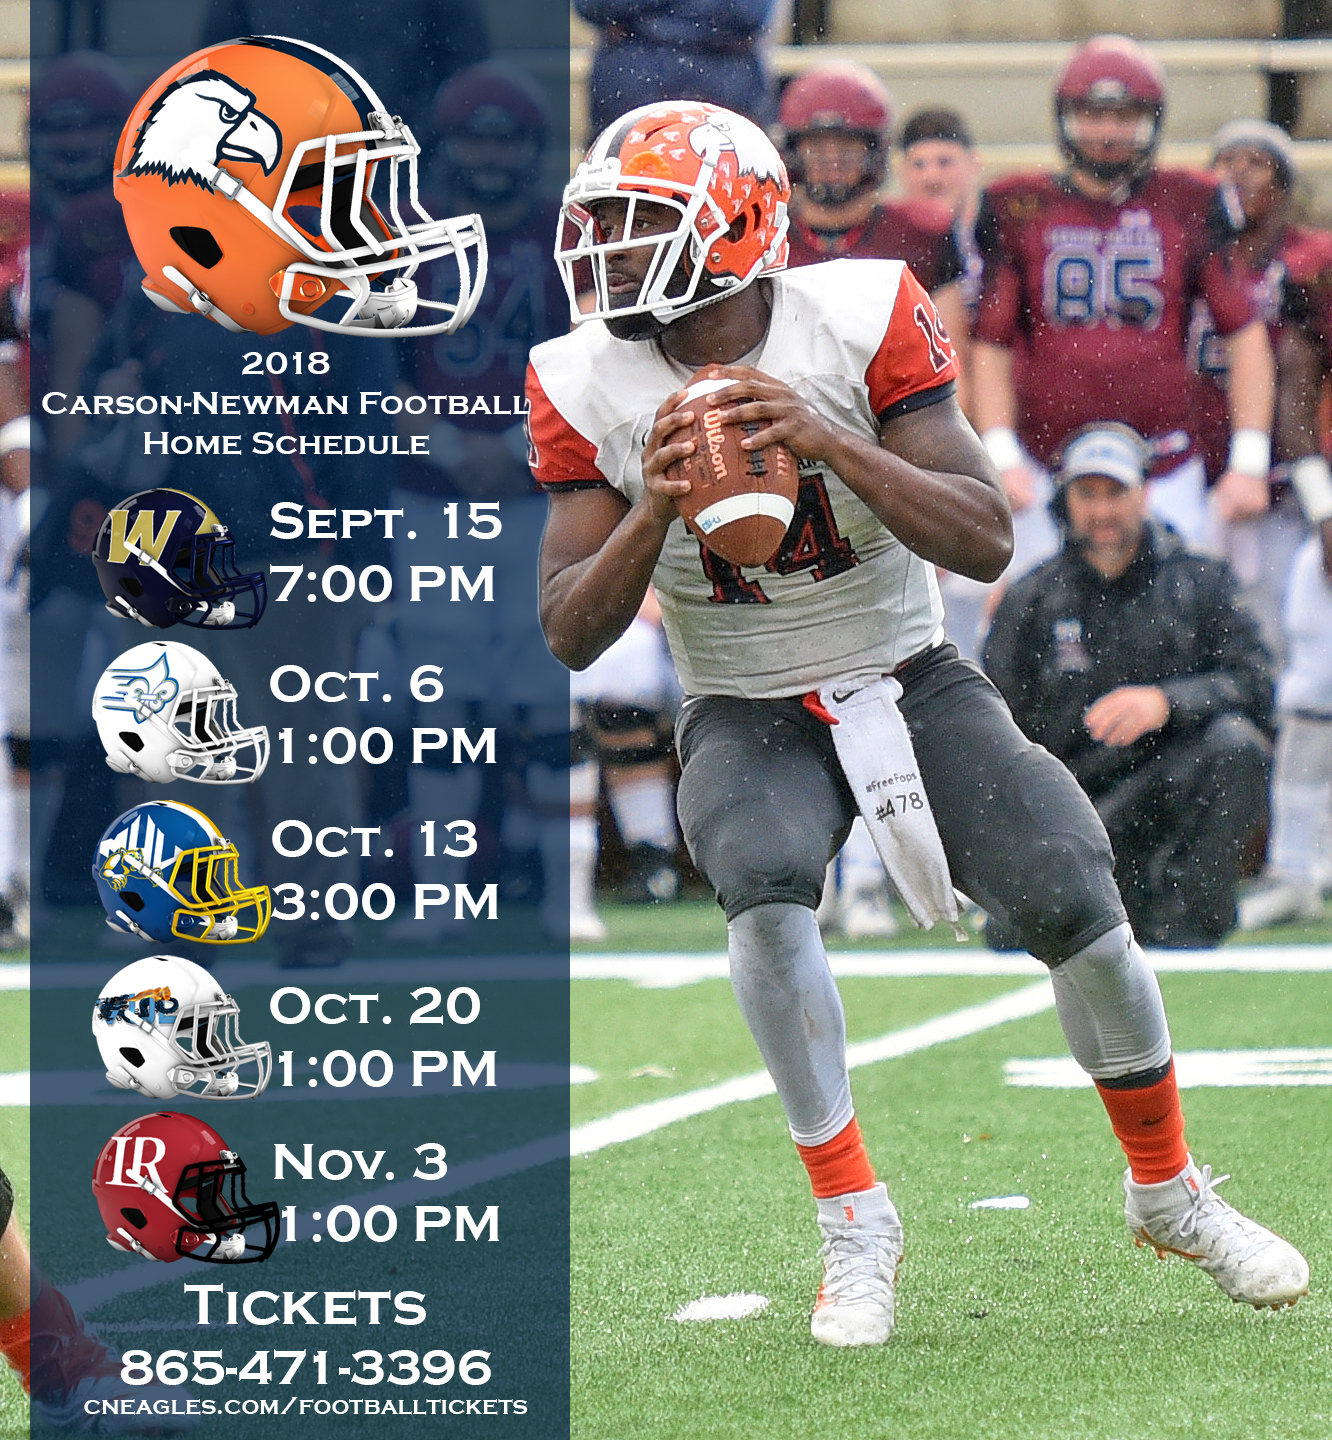 Season tickets on sale for 2018 Carson-Newman football schedule